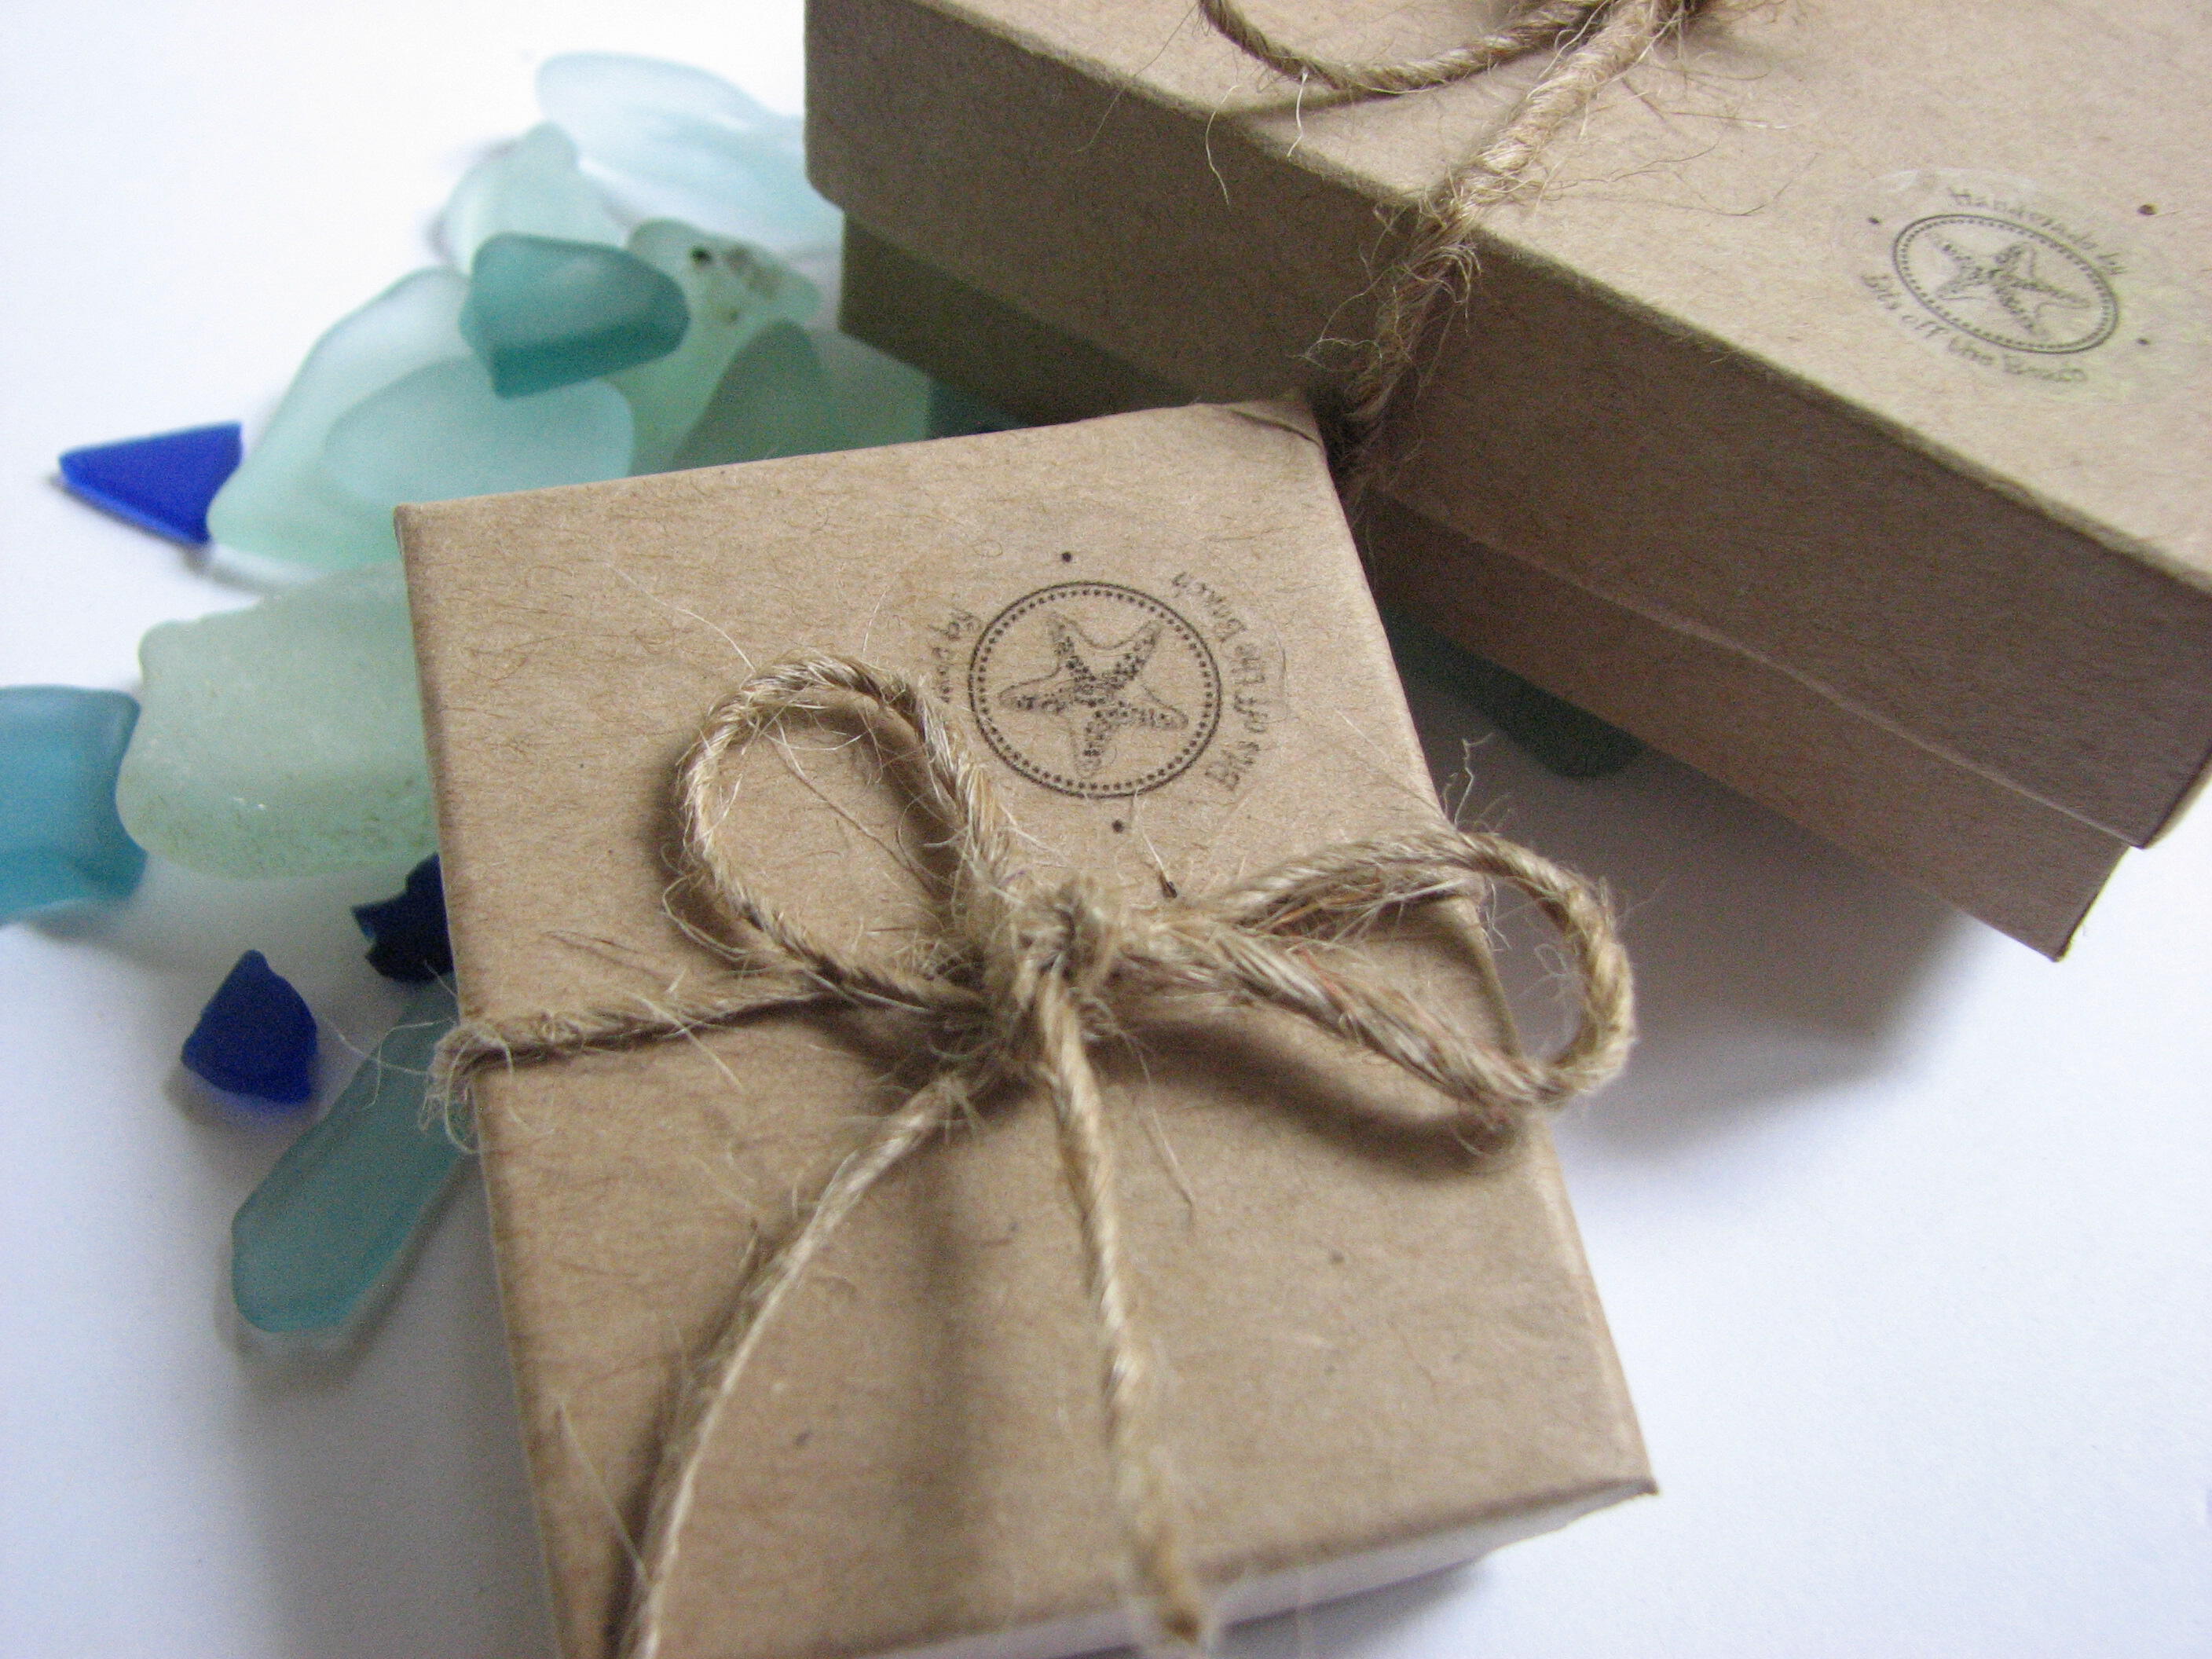 Each item comes gift boxed and ready to give.